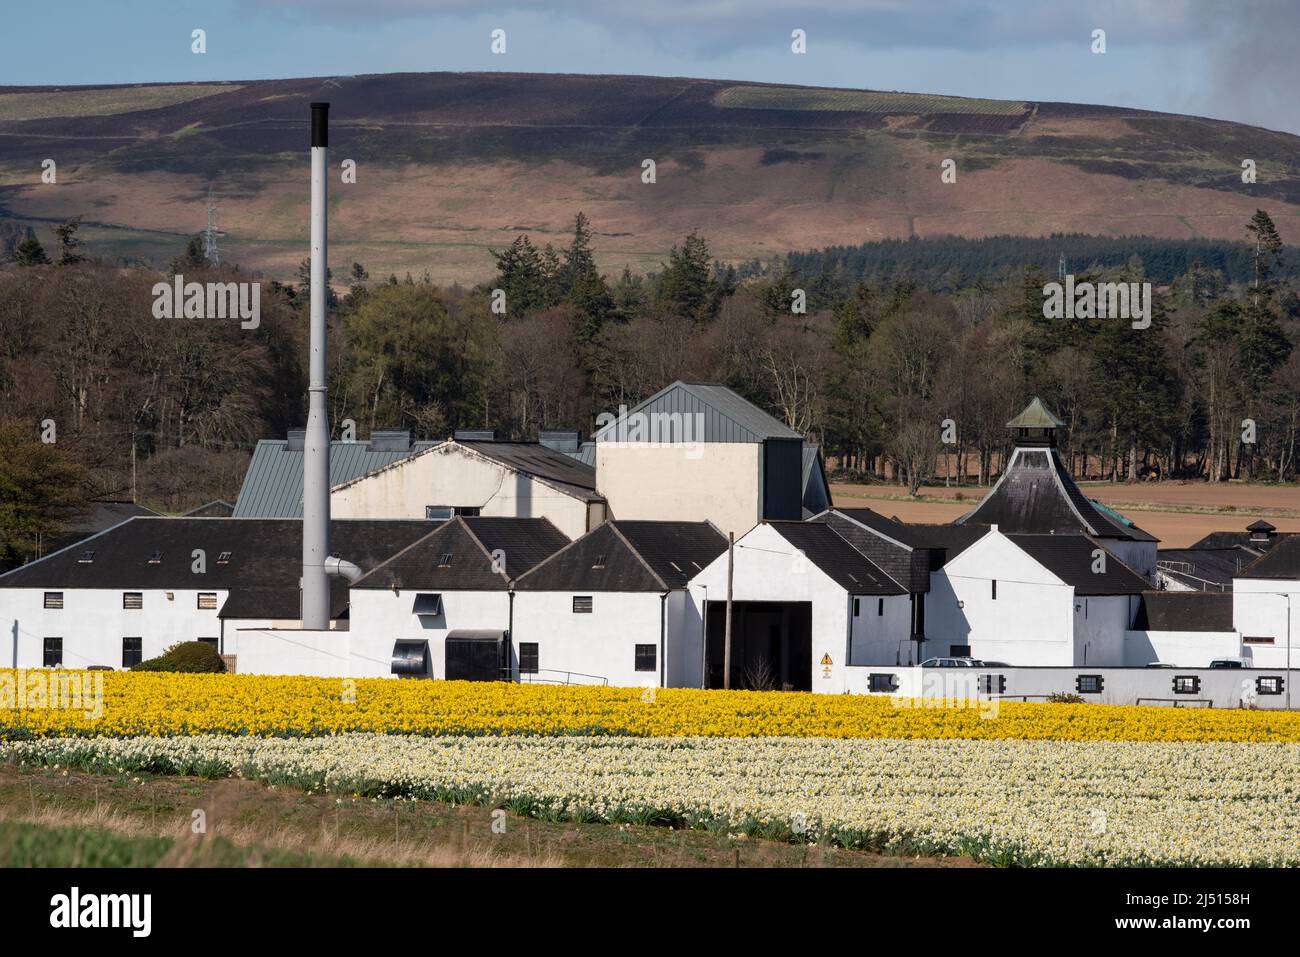 Field of daffodils in front of Fettercairn Distillery, Aberdeenshire, Scotland. Stock Photo